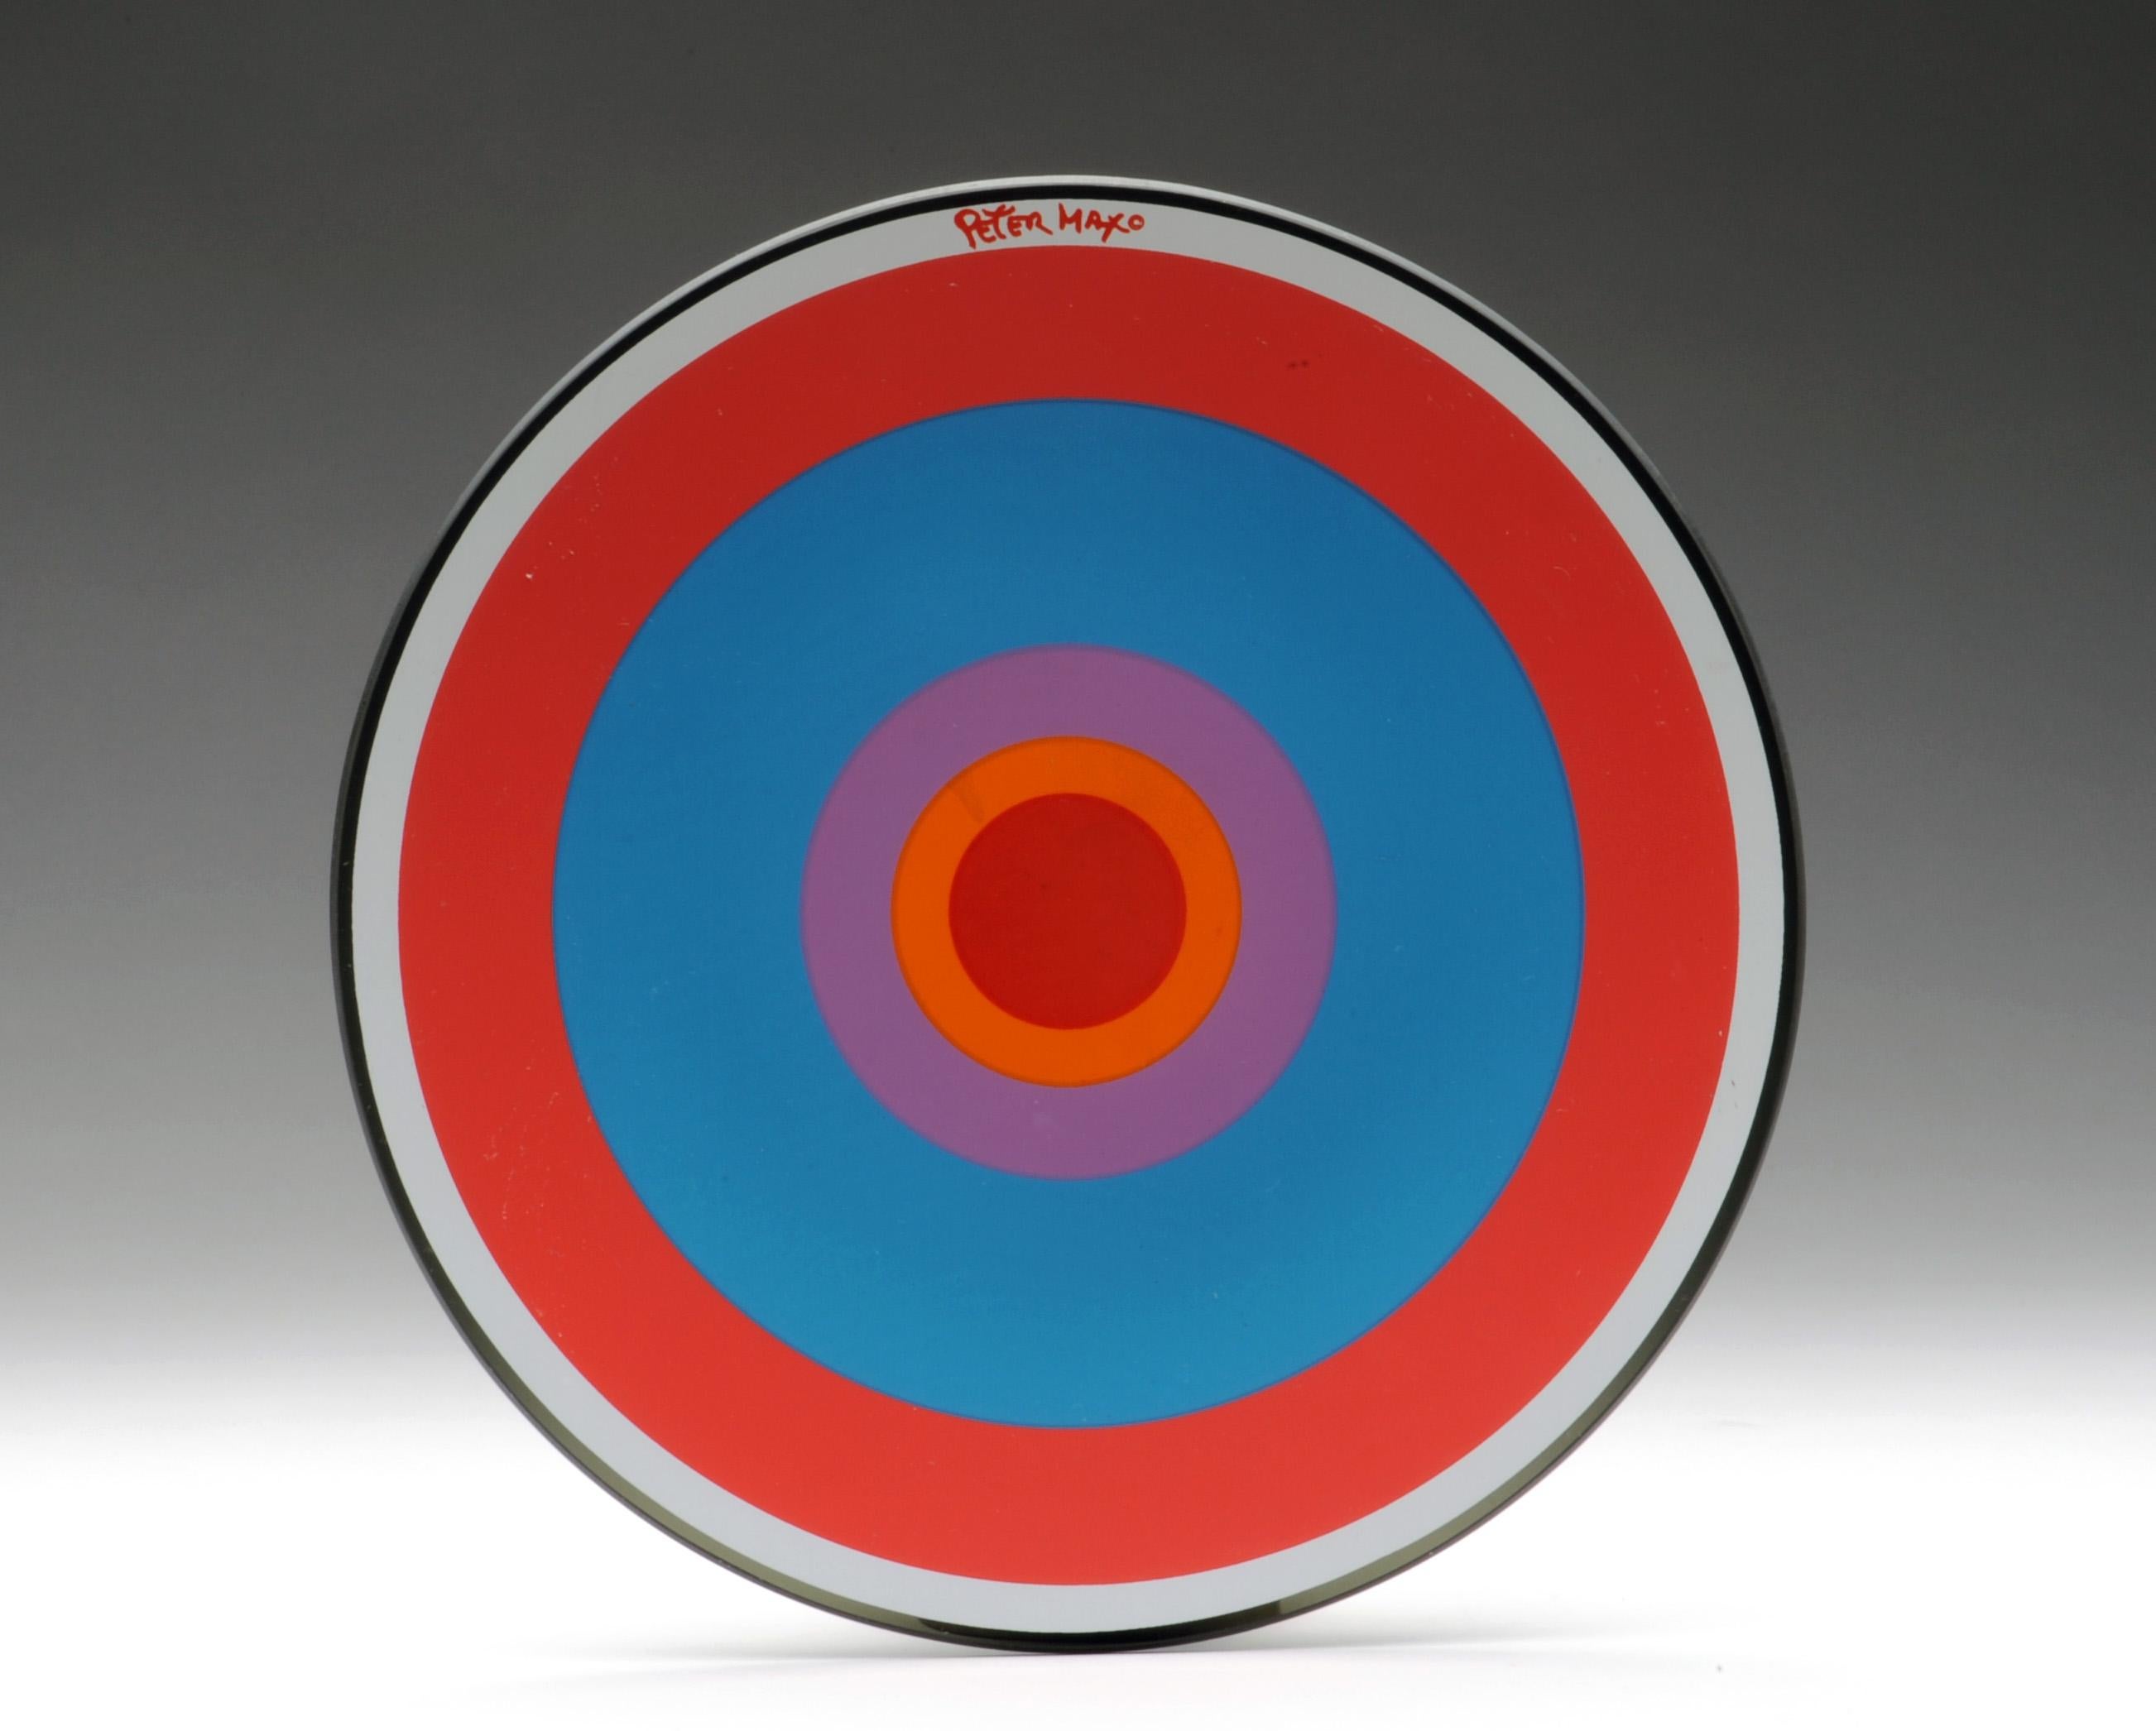 Hard to find Peter Max glass bullseye glass plate. Plate measures 9